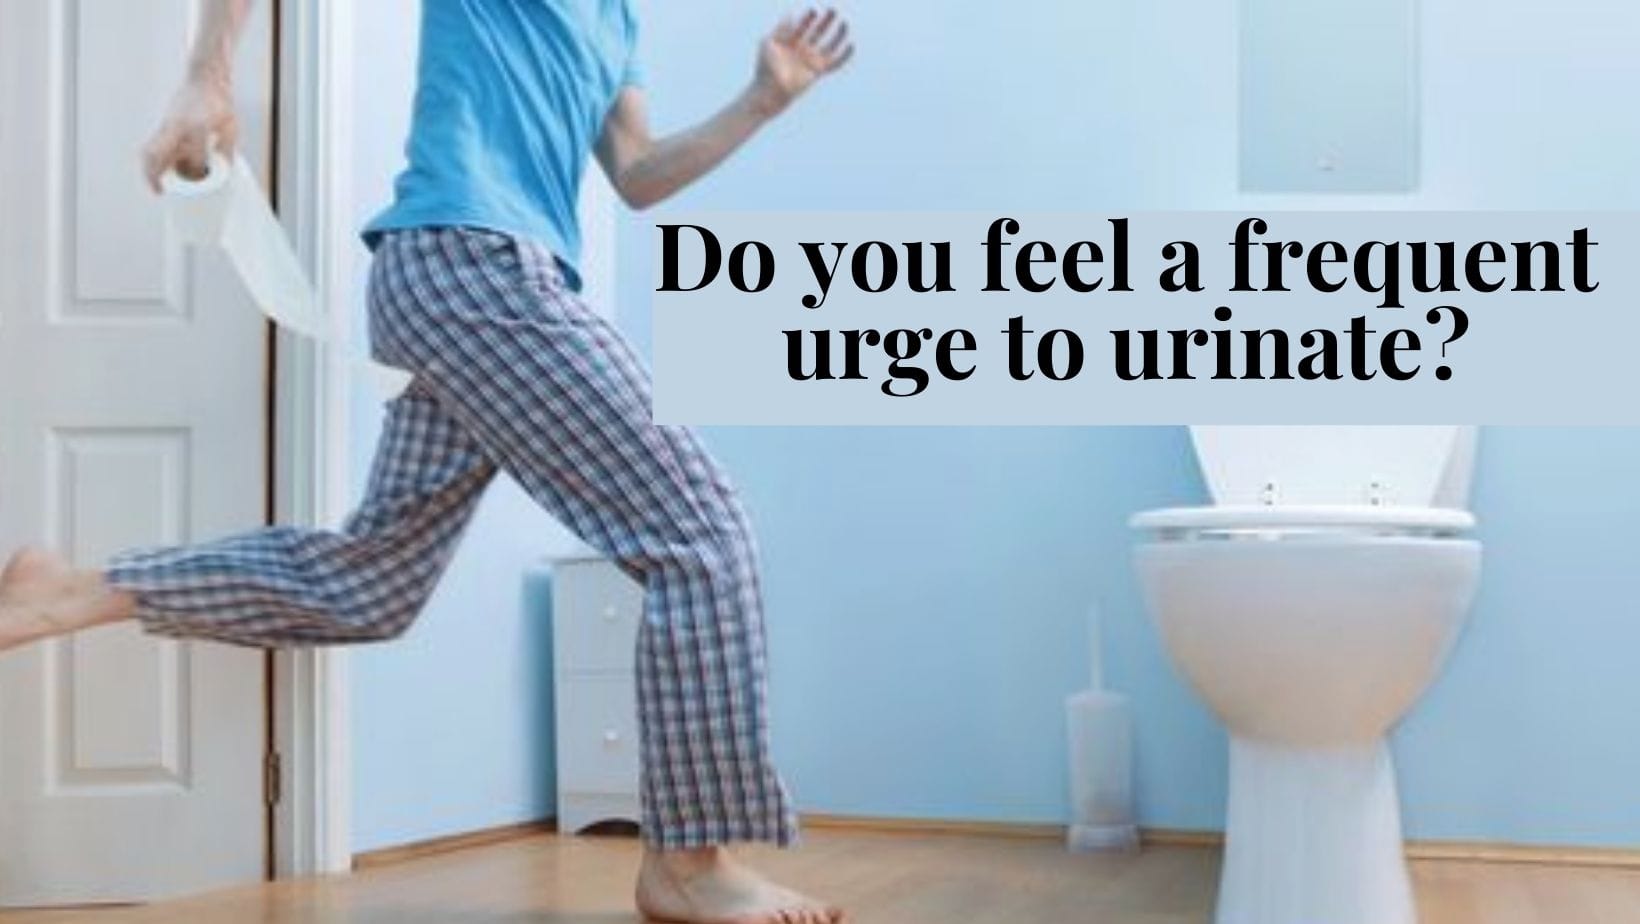 Warning: Here's why waking up to urinate at night is NOT always normal!